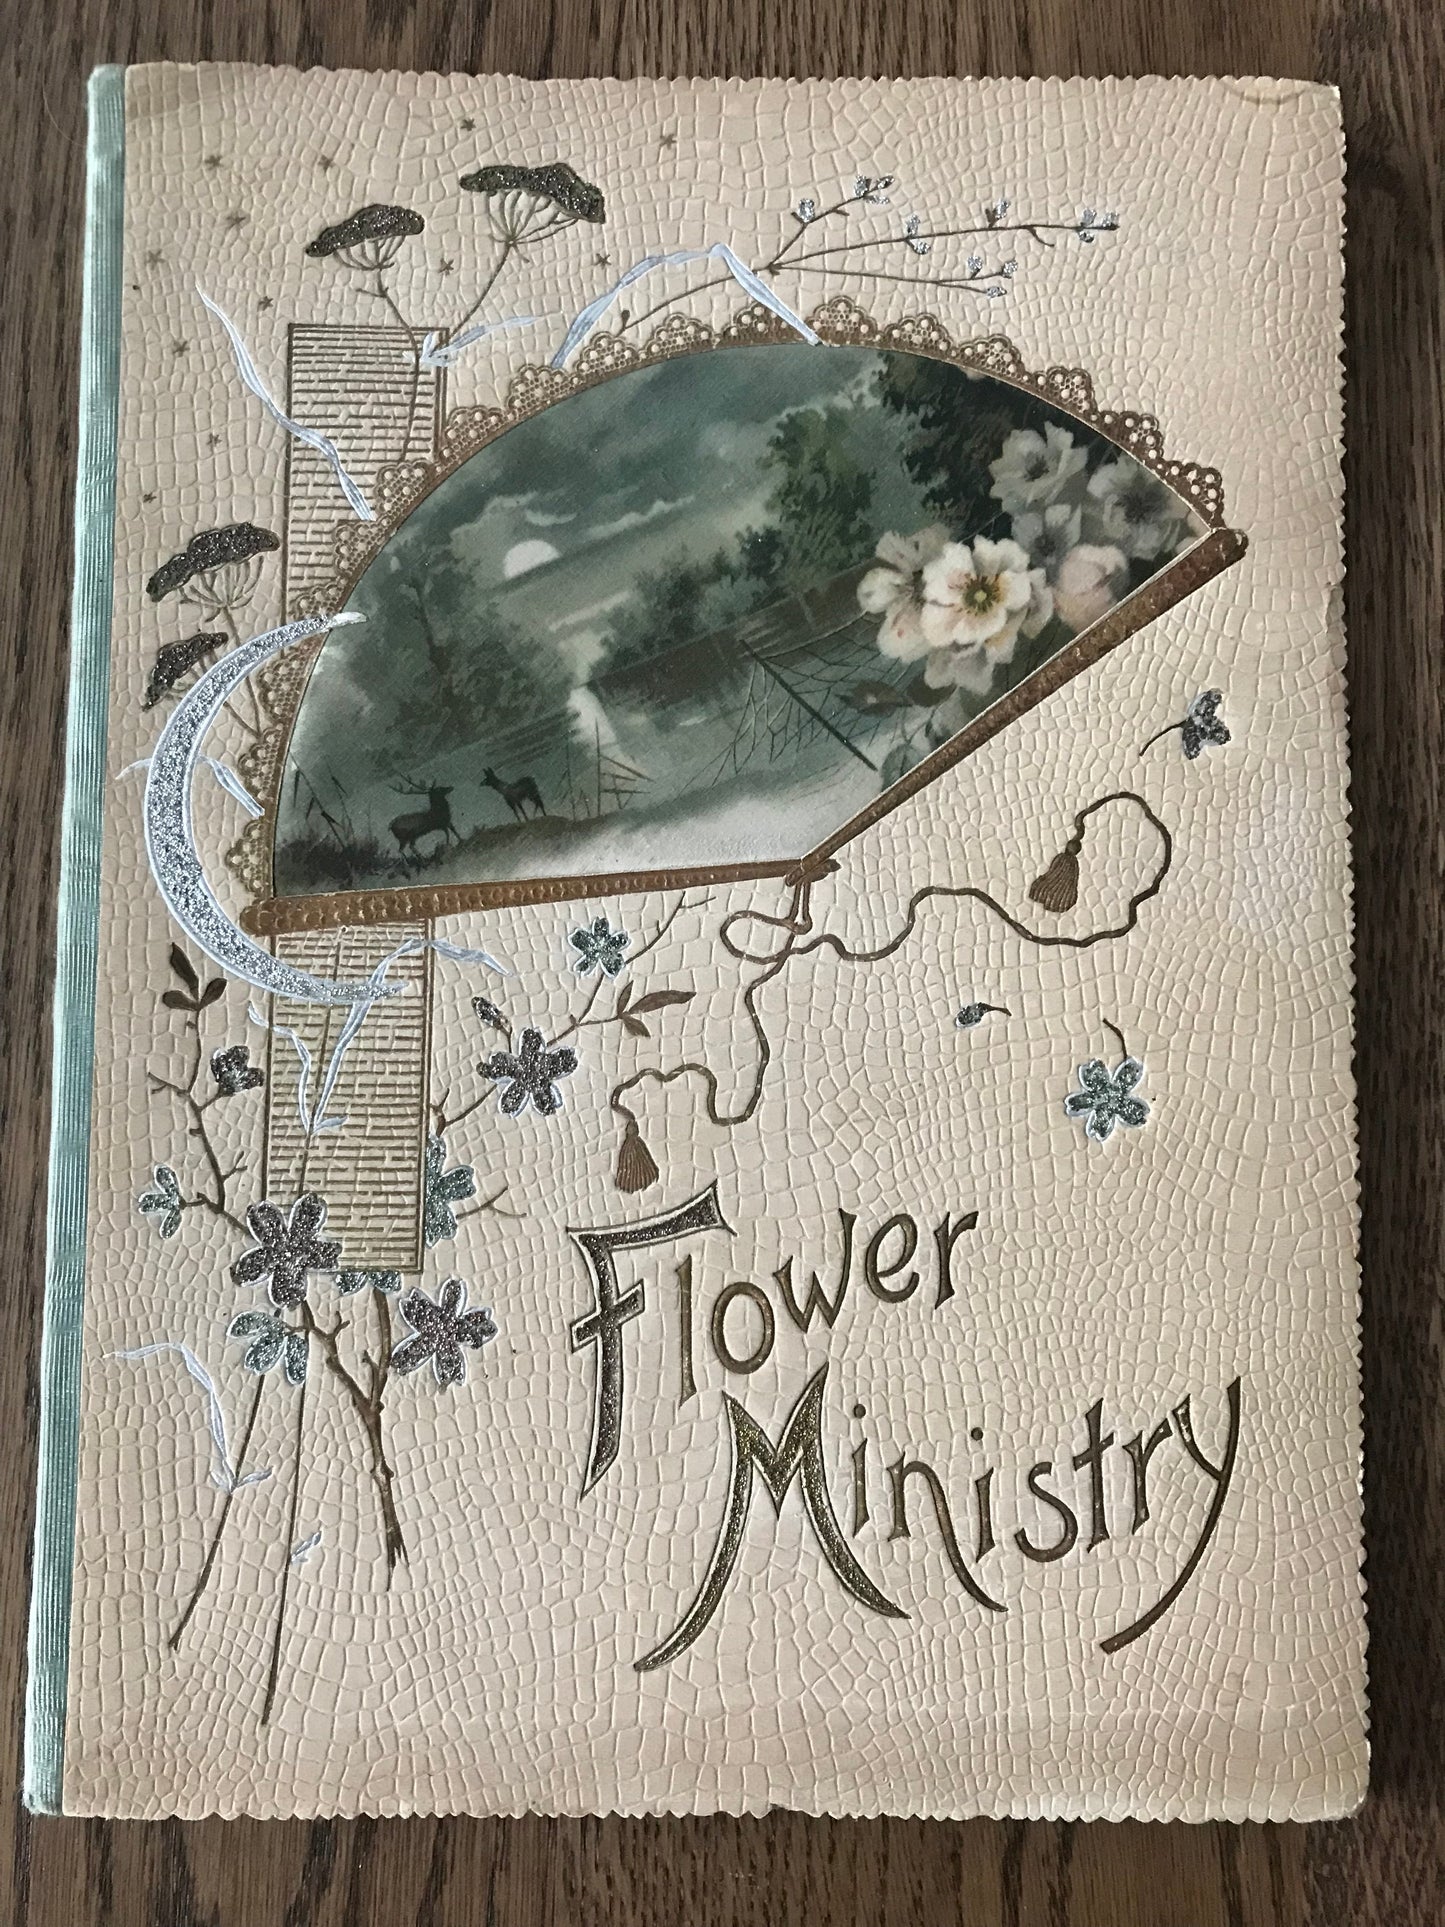 FLOWER - MUSIC AND OTHER POEMS BY CHARLOTTE MURRAY BooksCardsNBikes